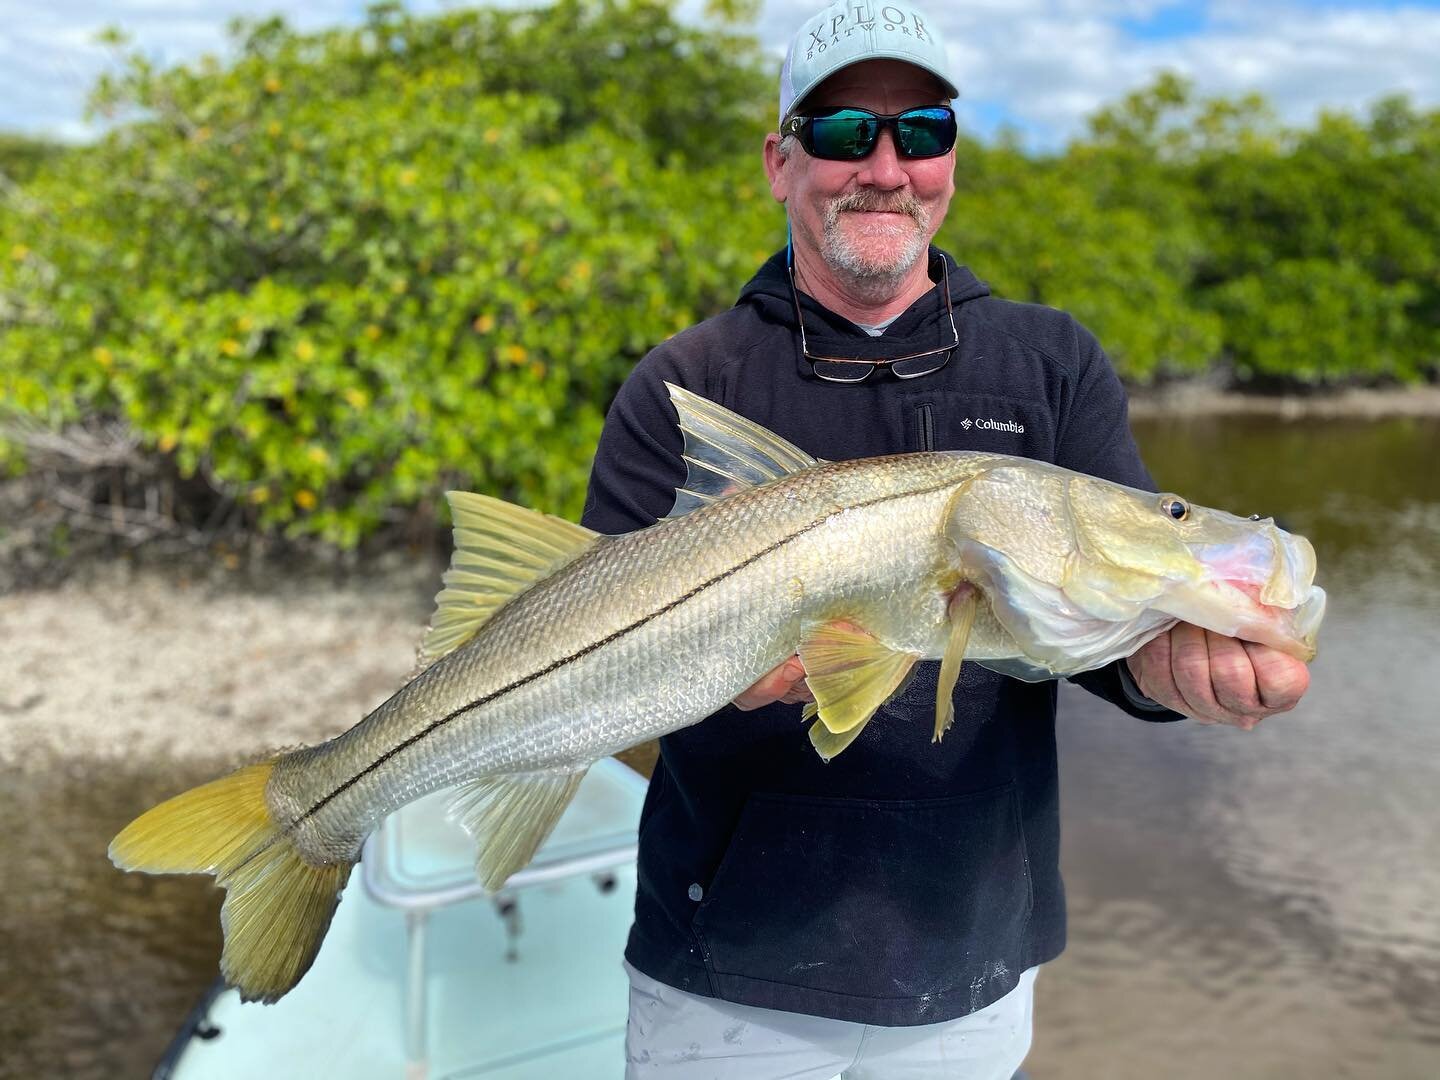 John Halker of S.C. drove down and fought the gale force winds and ultra negative tides to #sightfish this hefty #snookonfly 
naplesfloridaflyfishing.com
AnglersAddictionGuideSvc
#flyfishingguide #sightcasting #saltwaterflyfishing #flylords #inshore 